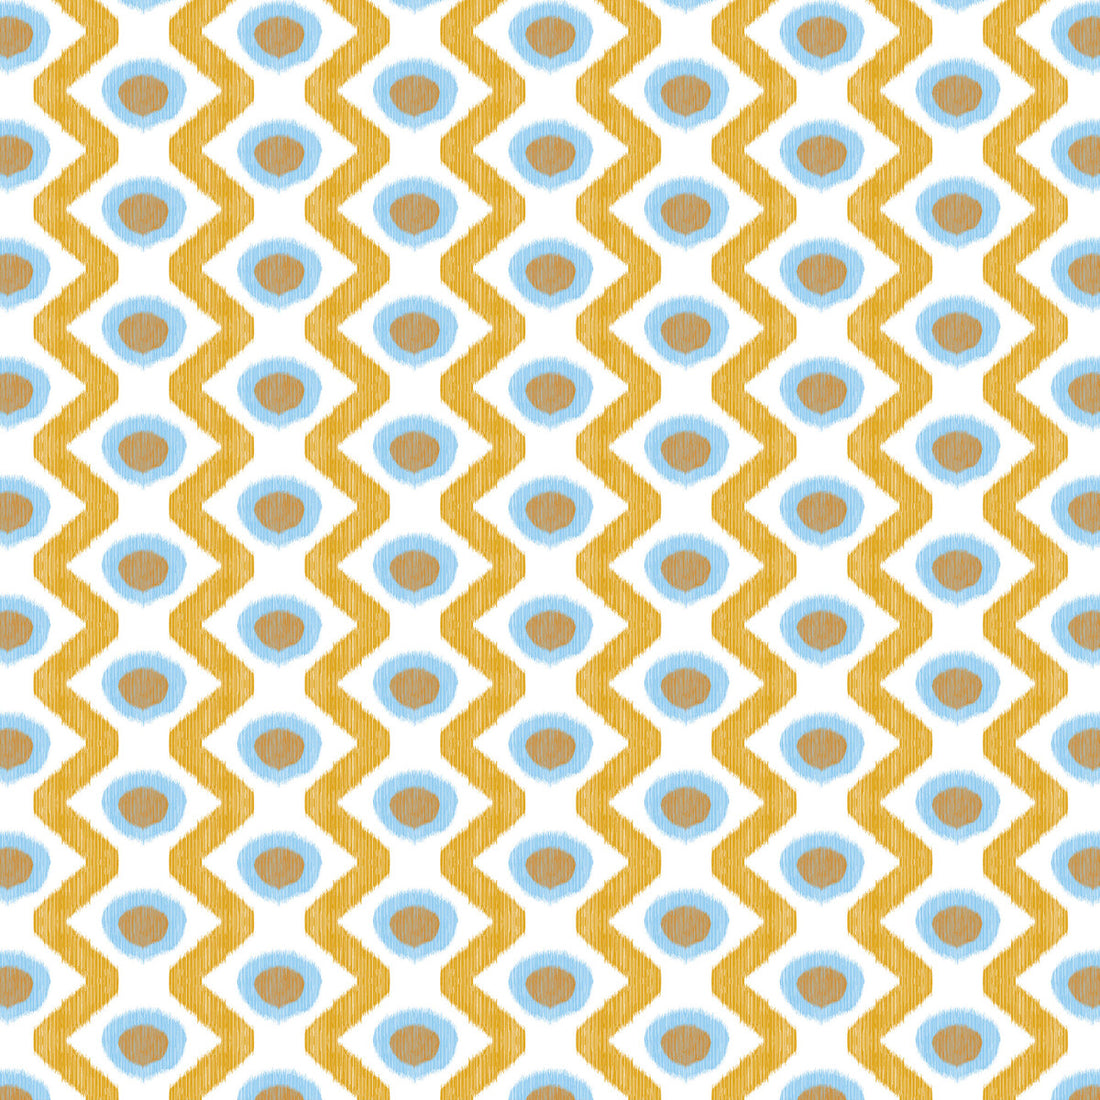 Cala Marsal fabric in azul ocre color - pattern GDT5681.004.0 - by Gaston y Daniela in the Gaston Maiorica collection